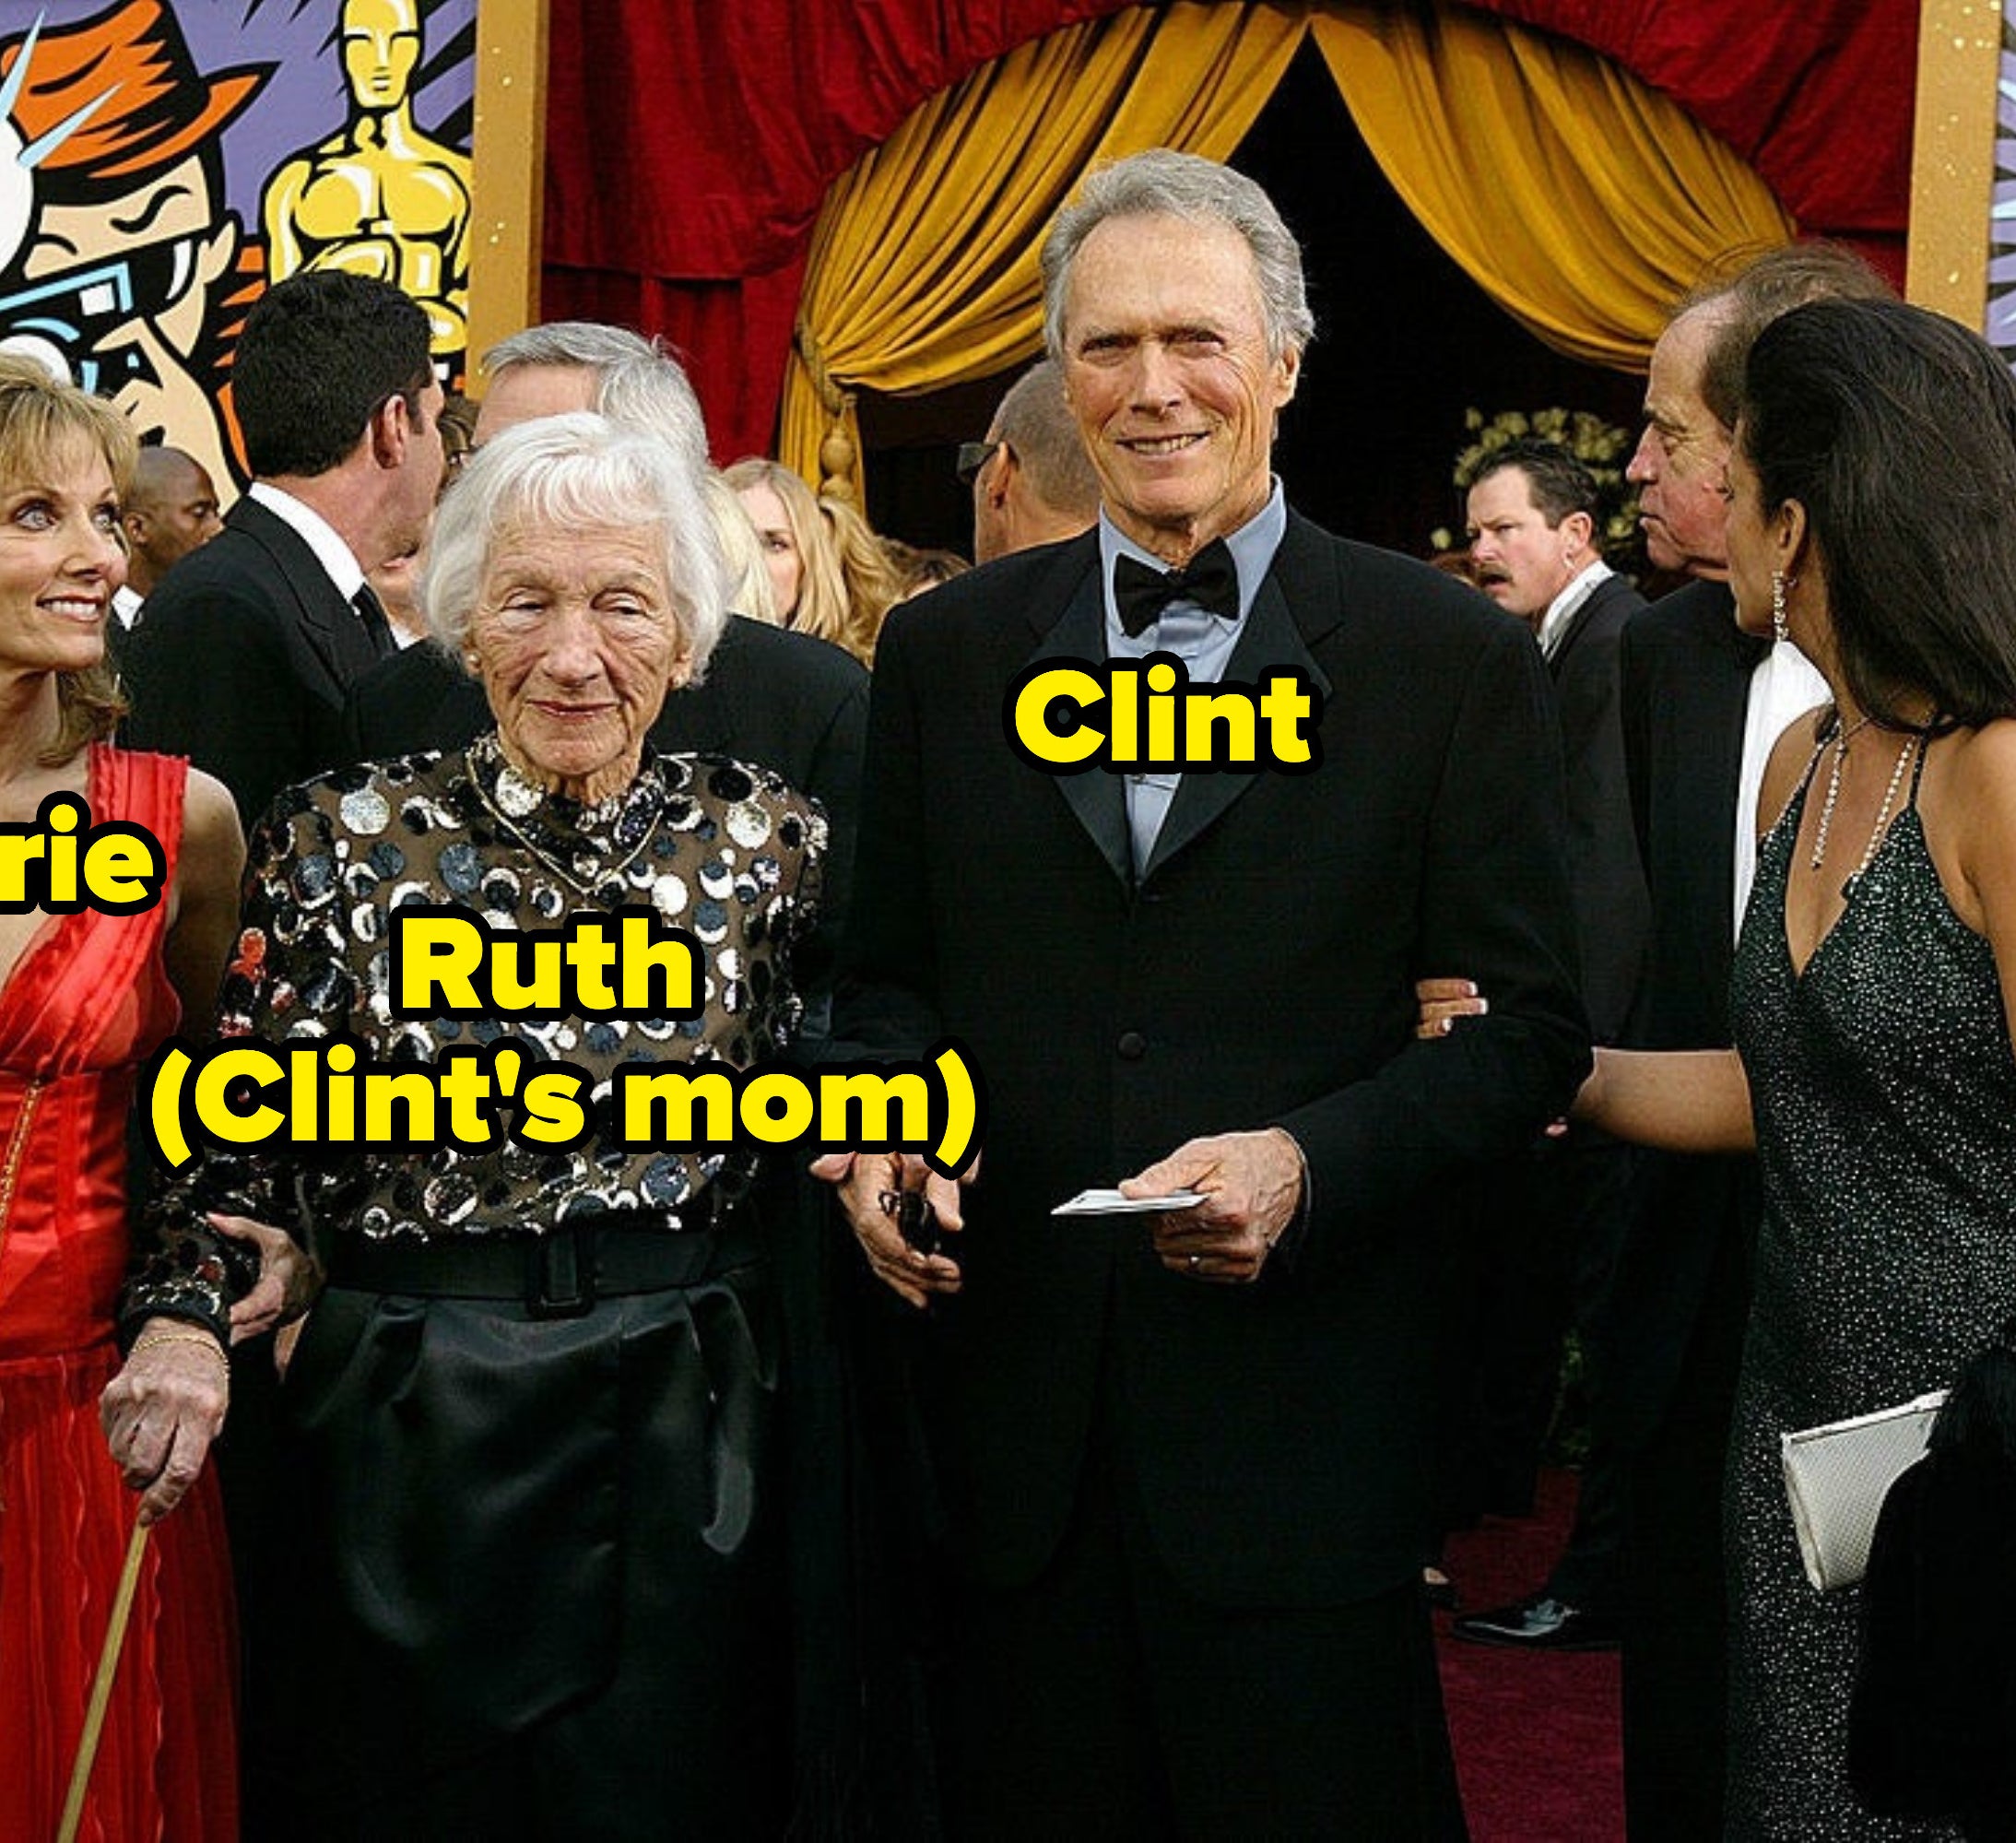 Laurie Murray, Ruth, and Clint Eastwood